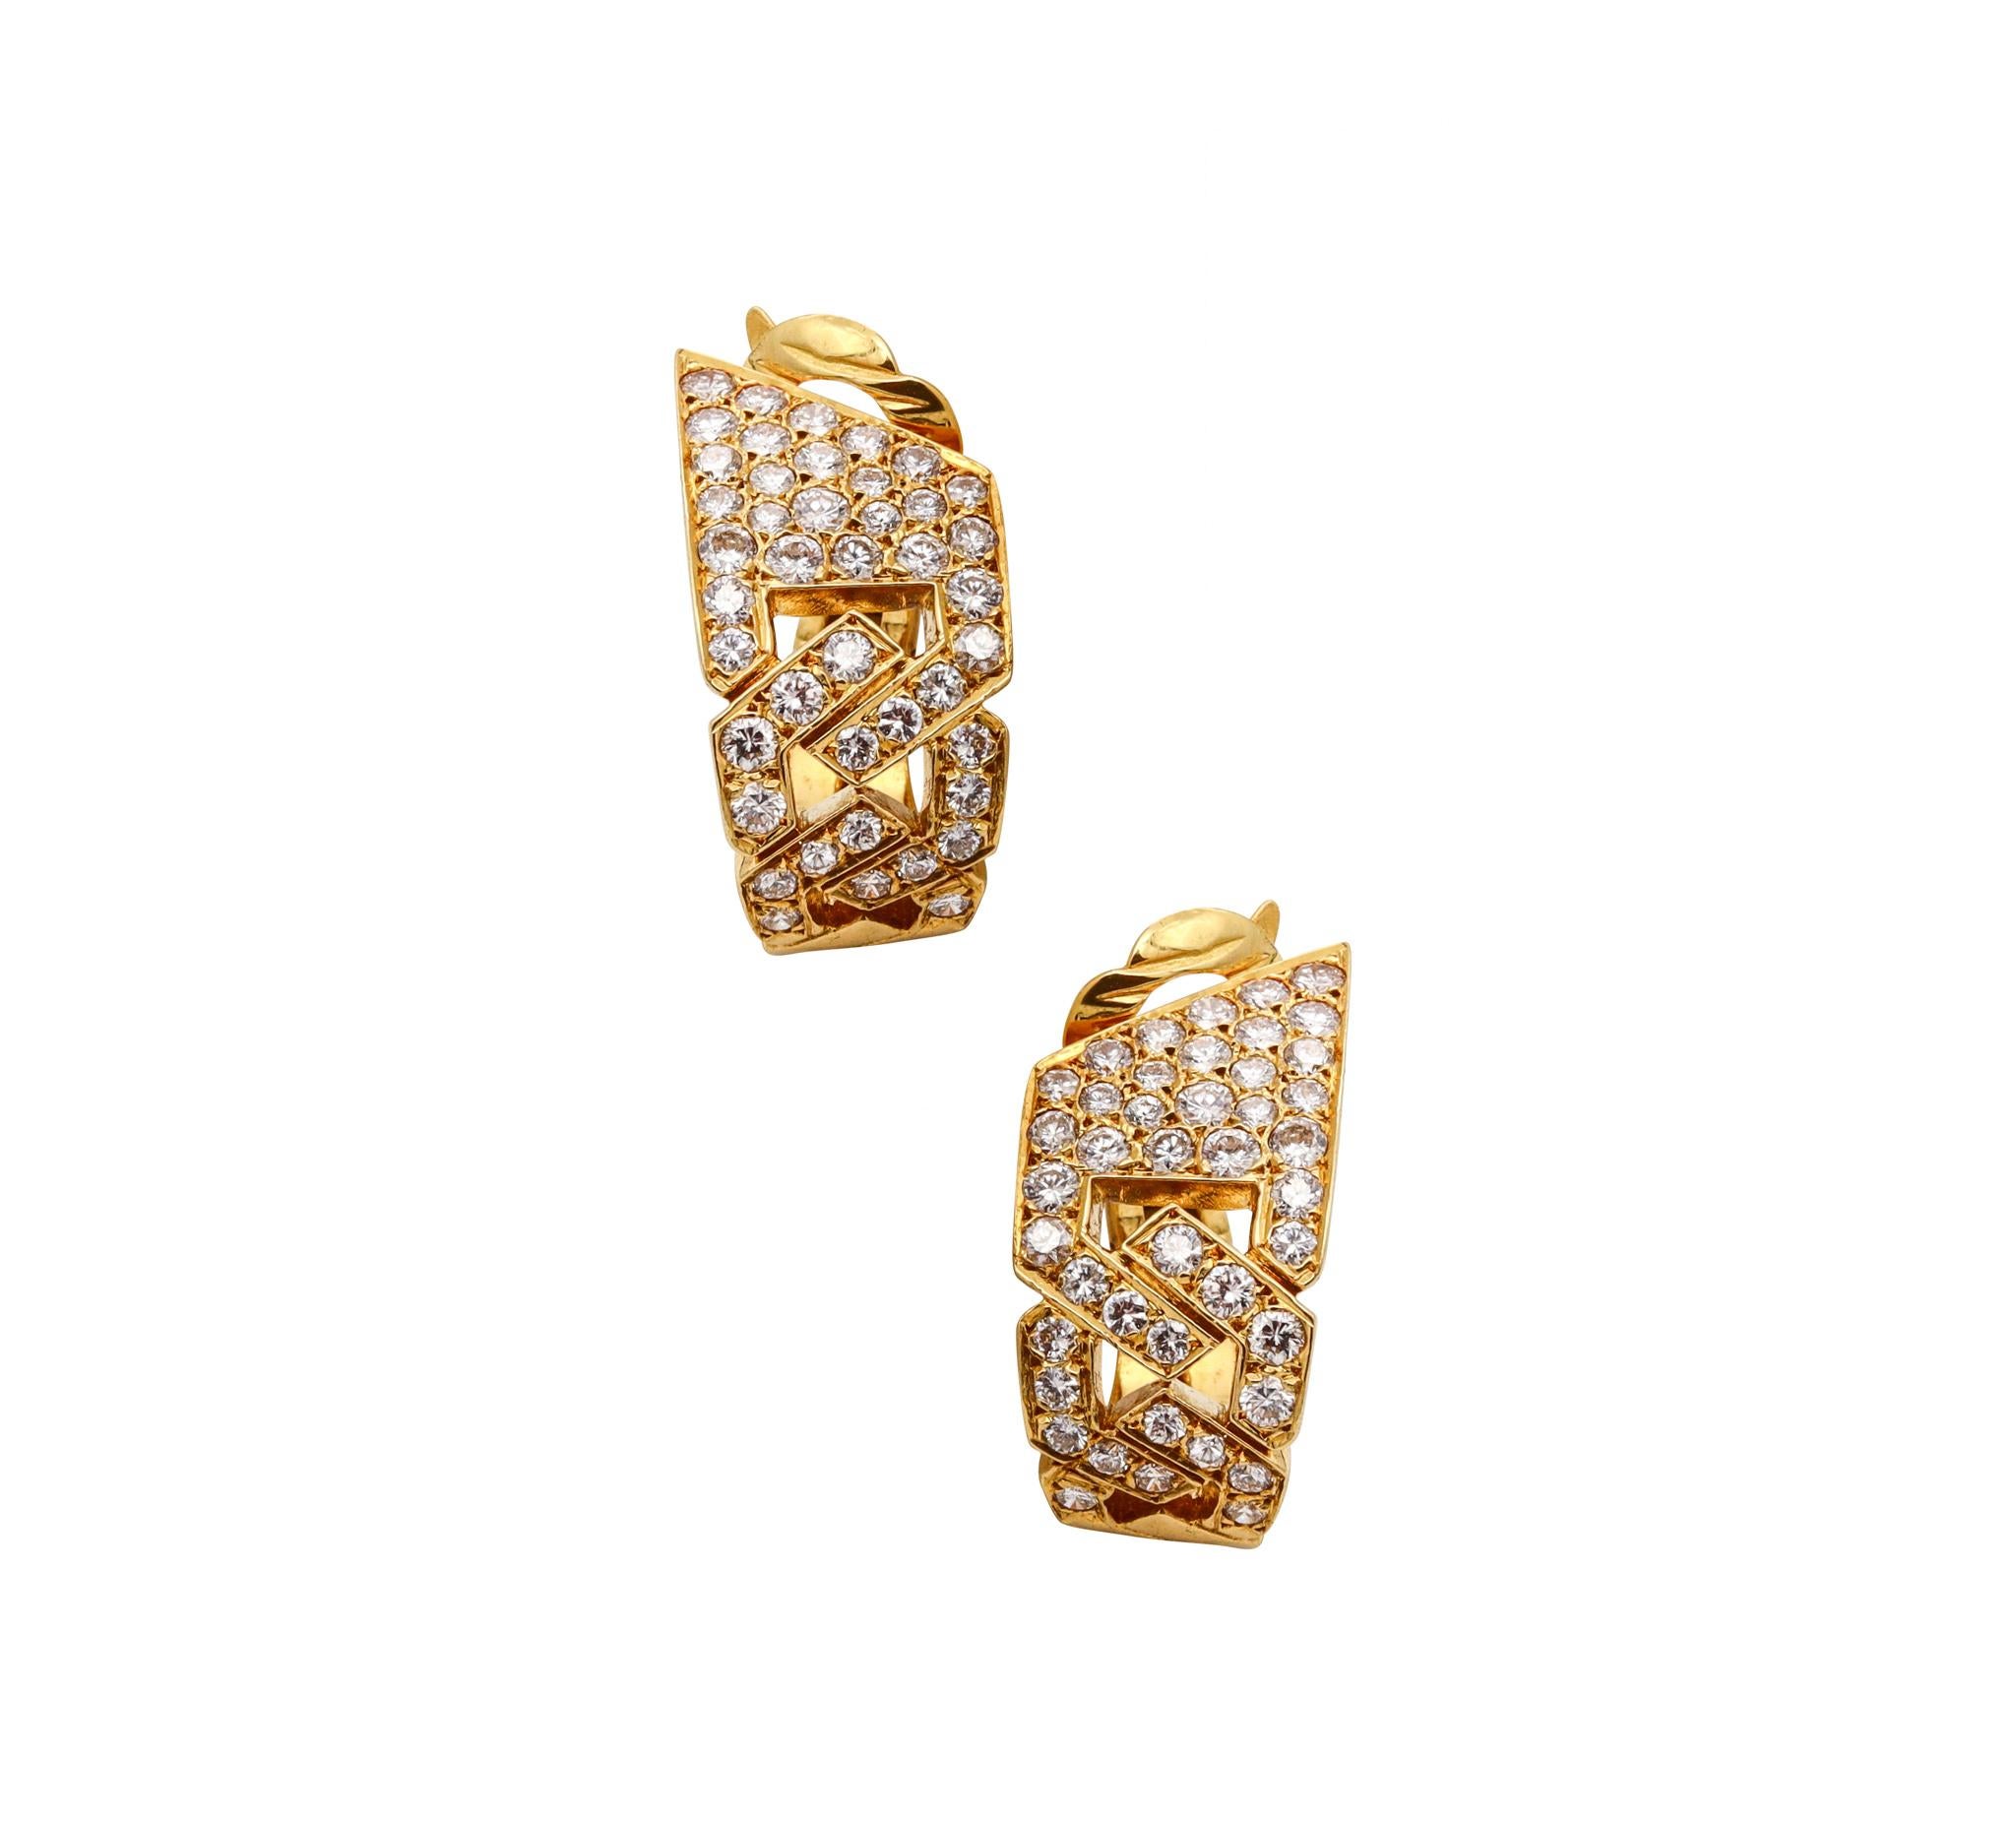 Exceptional pair of clips-earrings designed by Van Cleef & Arpels,

Gorgeous pieces made in Paris France by the house of Van Cleef & Arpels, back in the 1970's. They was crafted as a mirrored clips-earrings in solid yellow gold of 18 karats, with